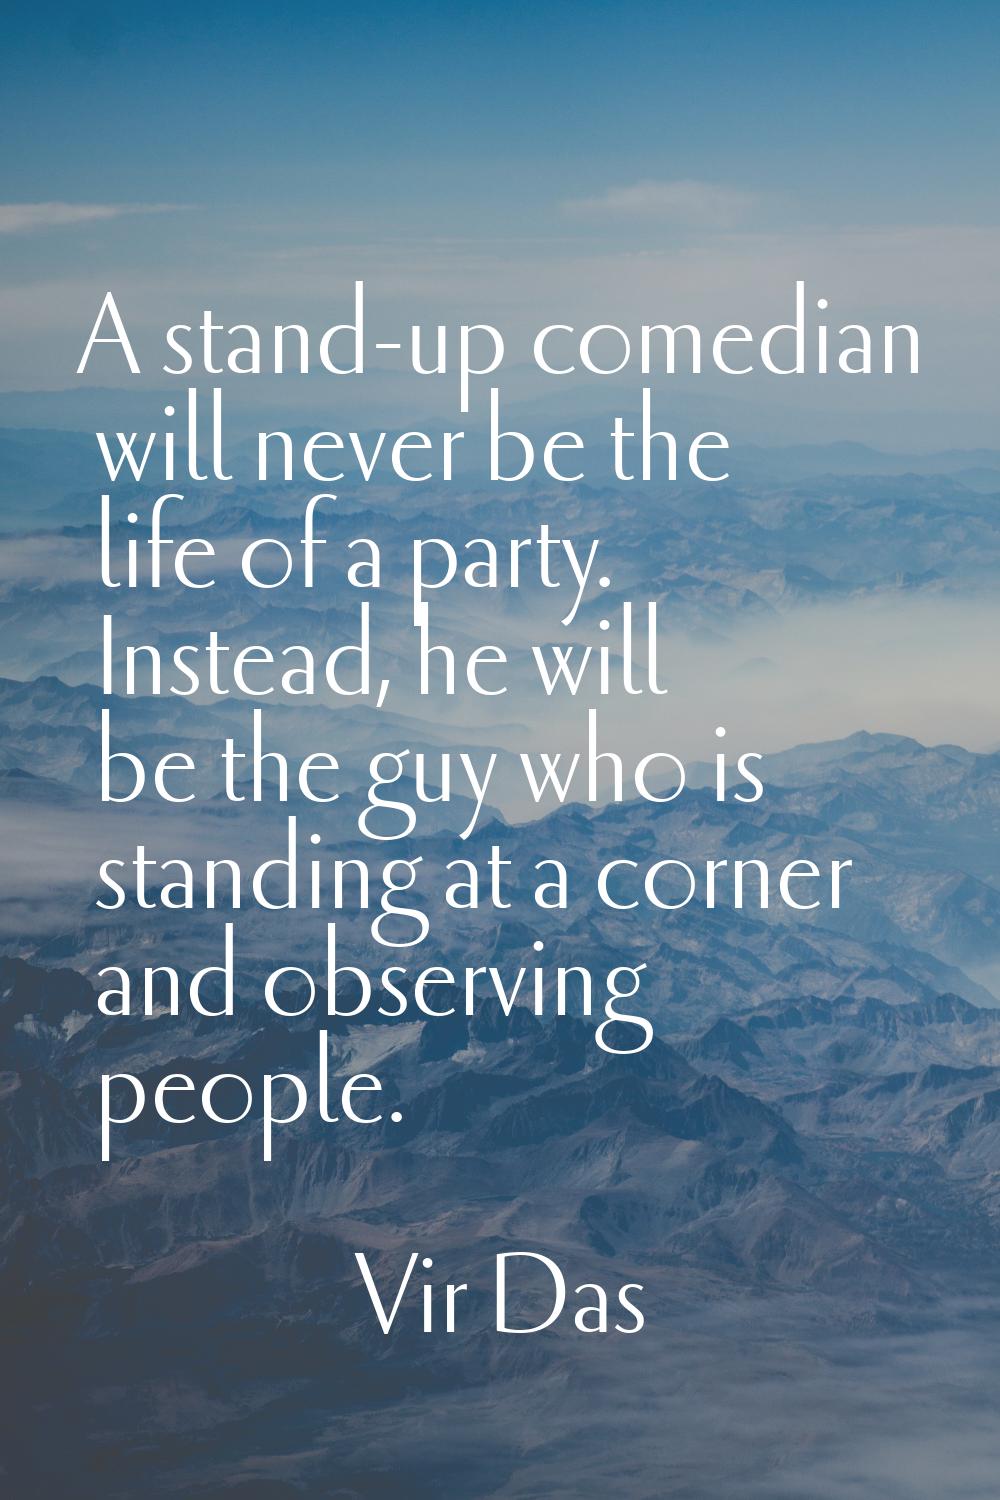 A stand-up comedian will never be the life of a party. Instead, he will be the guy who is standing 